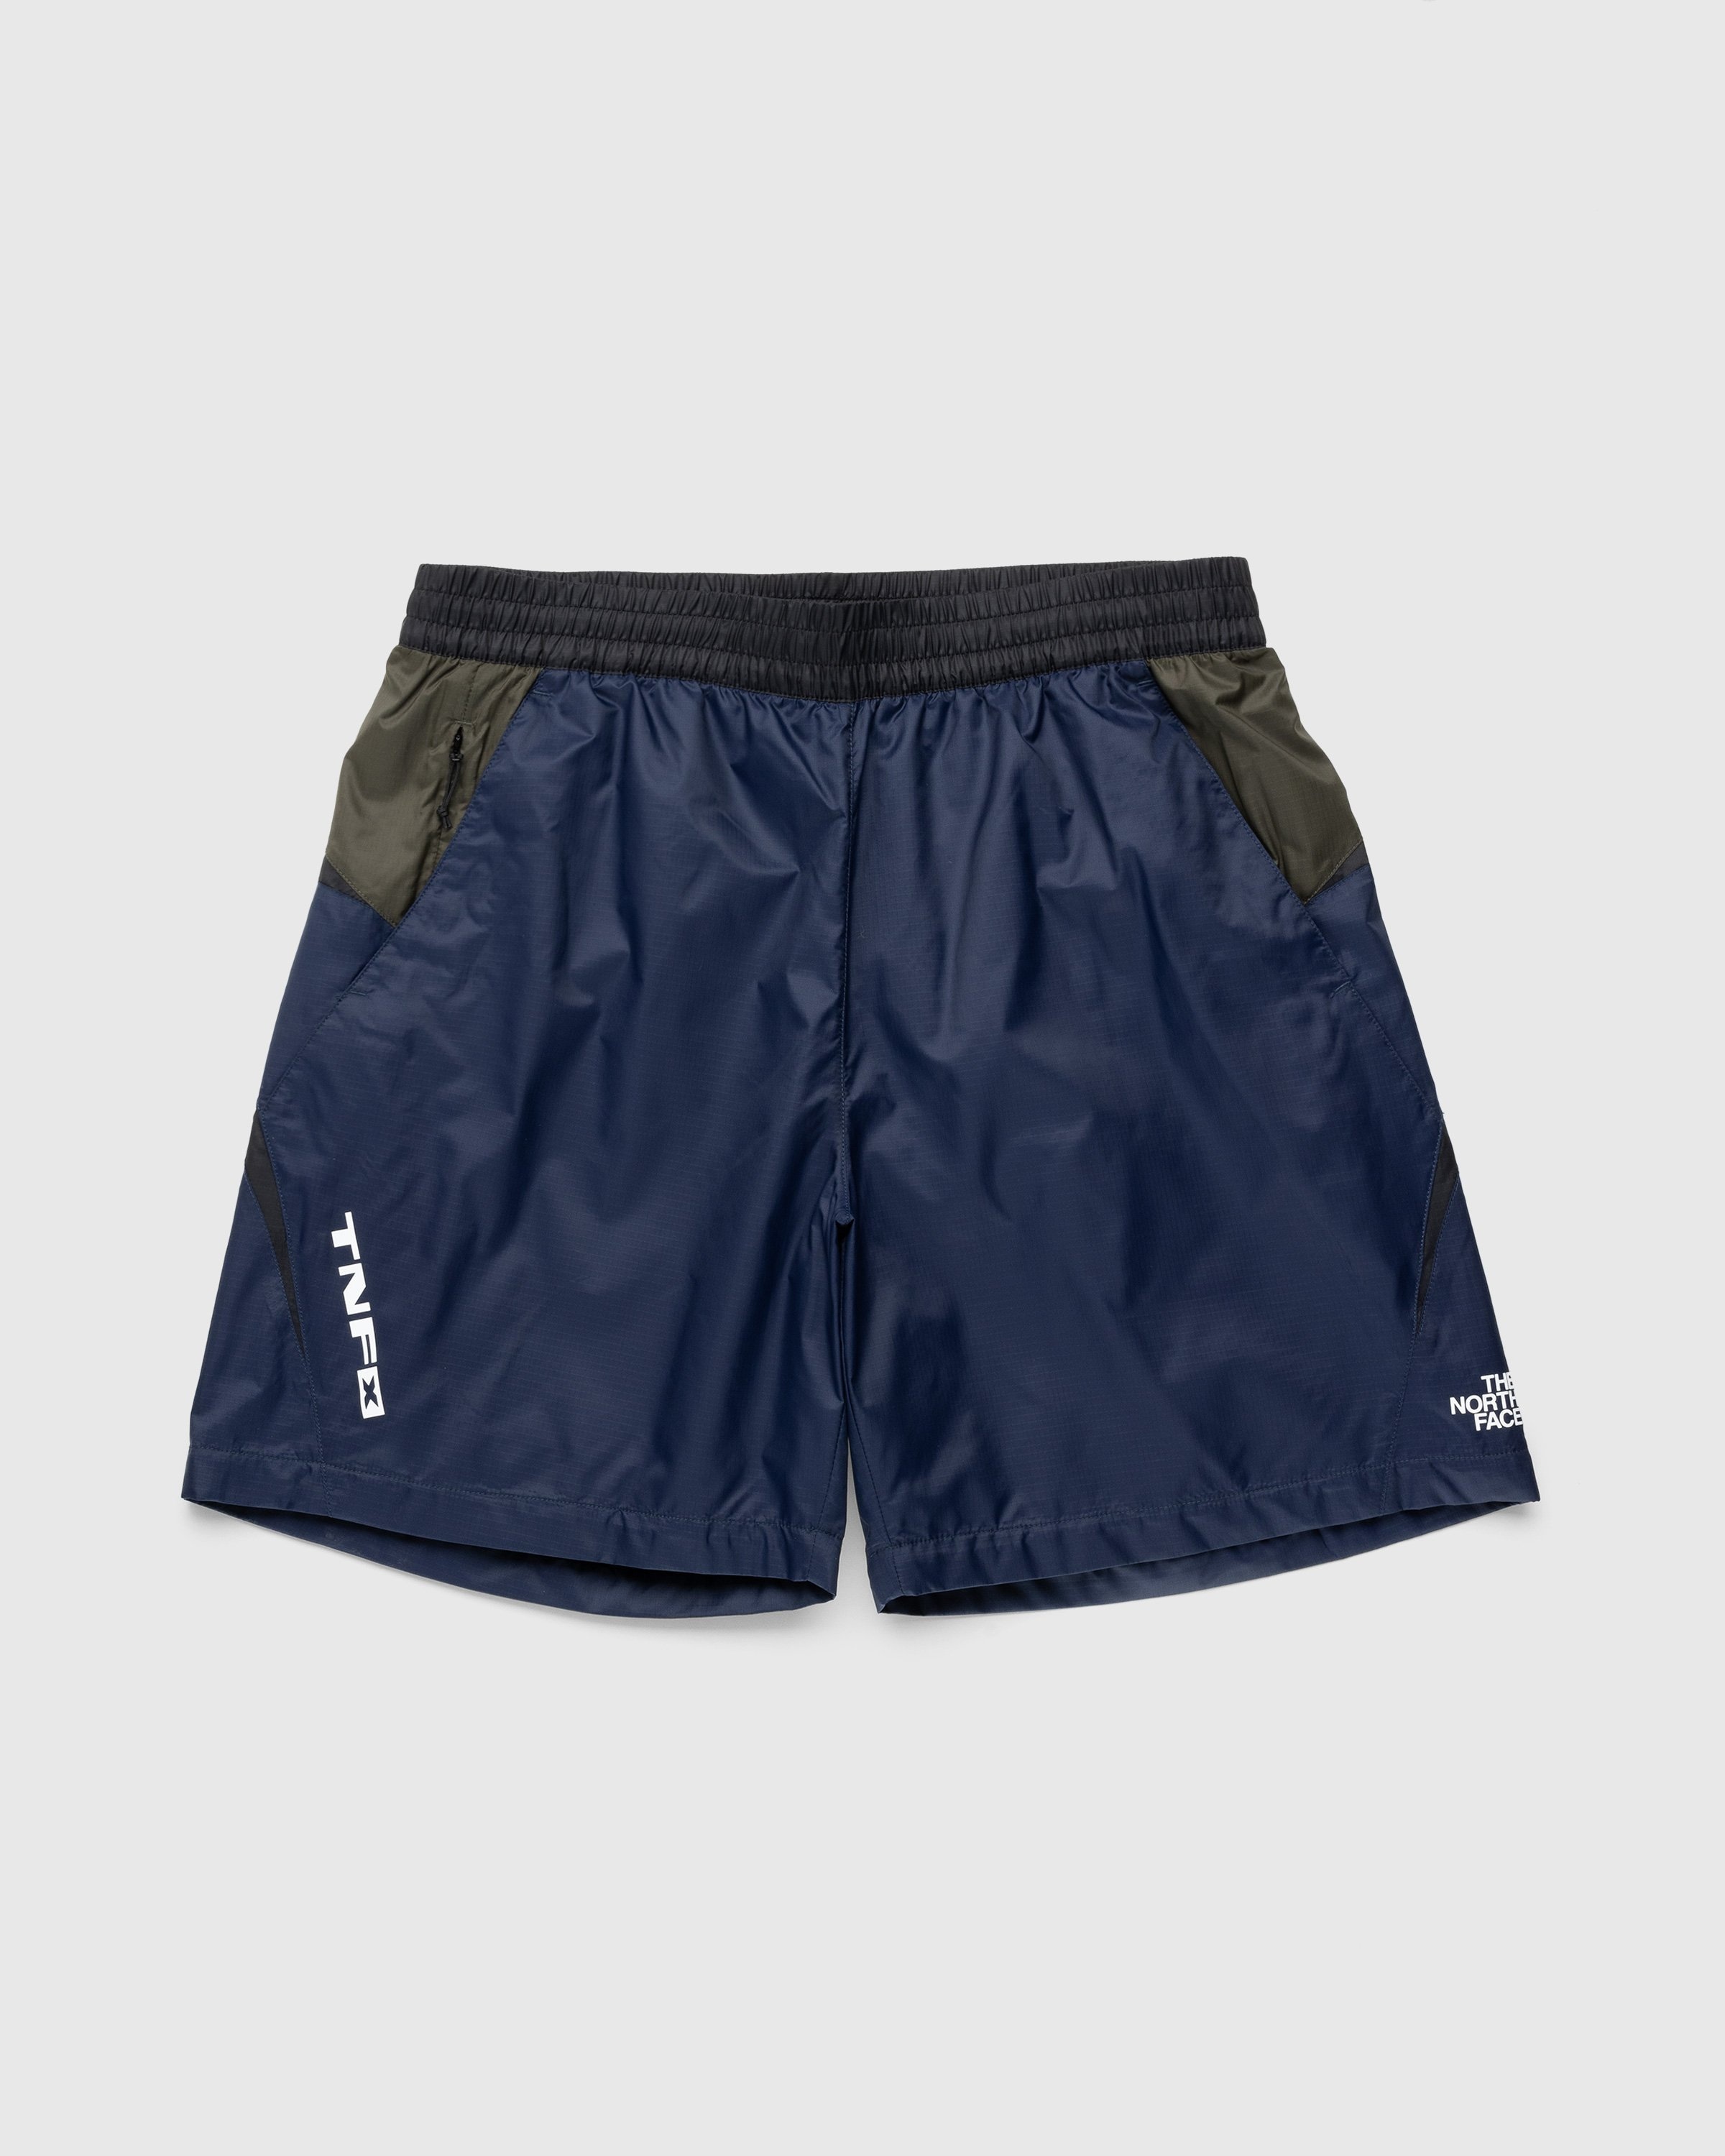 The North Face – TNF X Shorts Blue - Shorts - Blue - Image 1